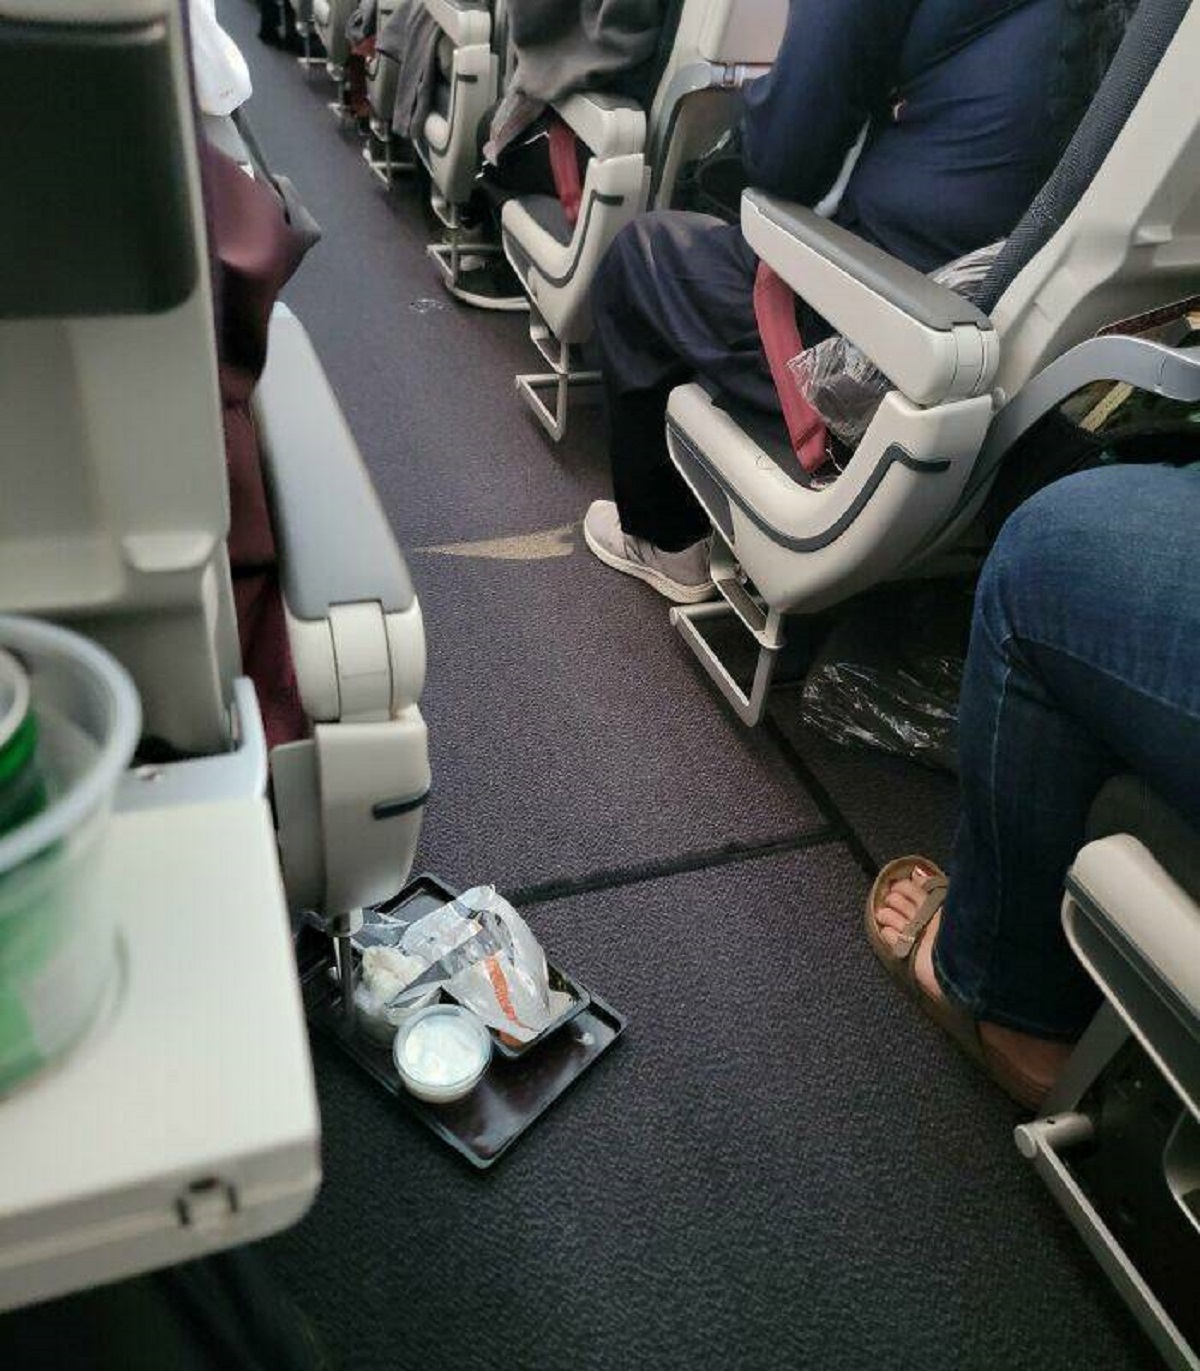 "This Woman Just Dropping Her Food Tray In The Middle Of The Aisle Of The Plane"